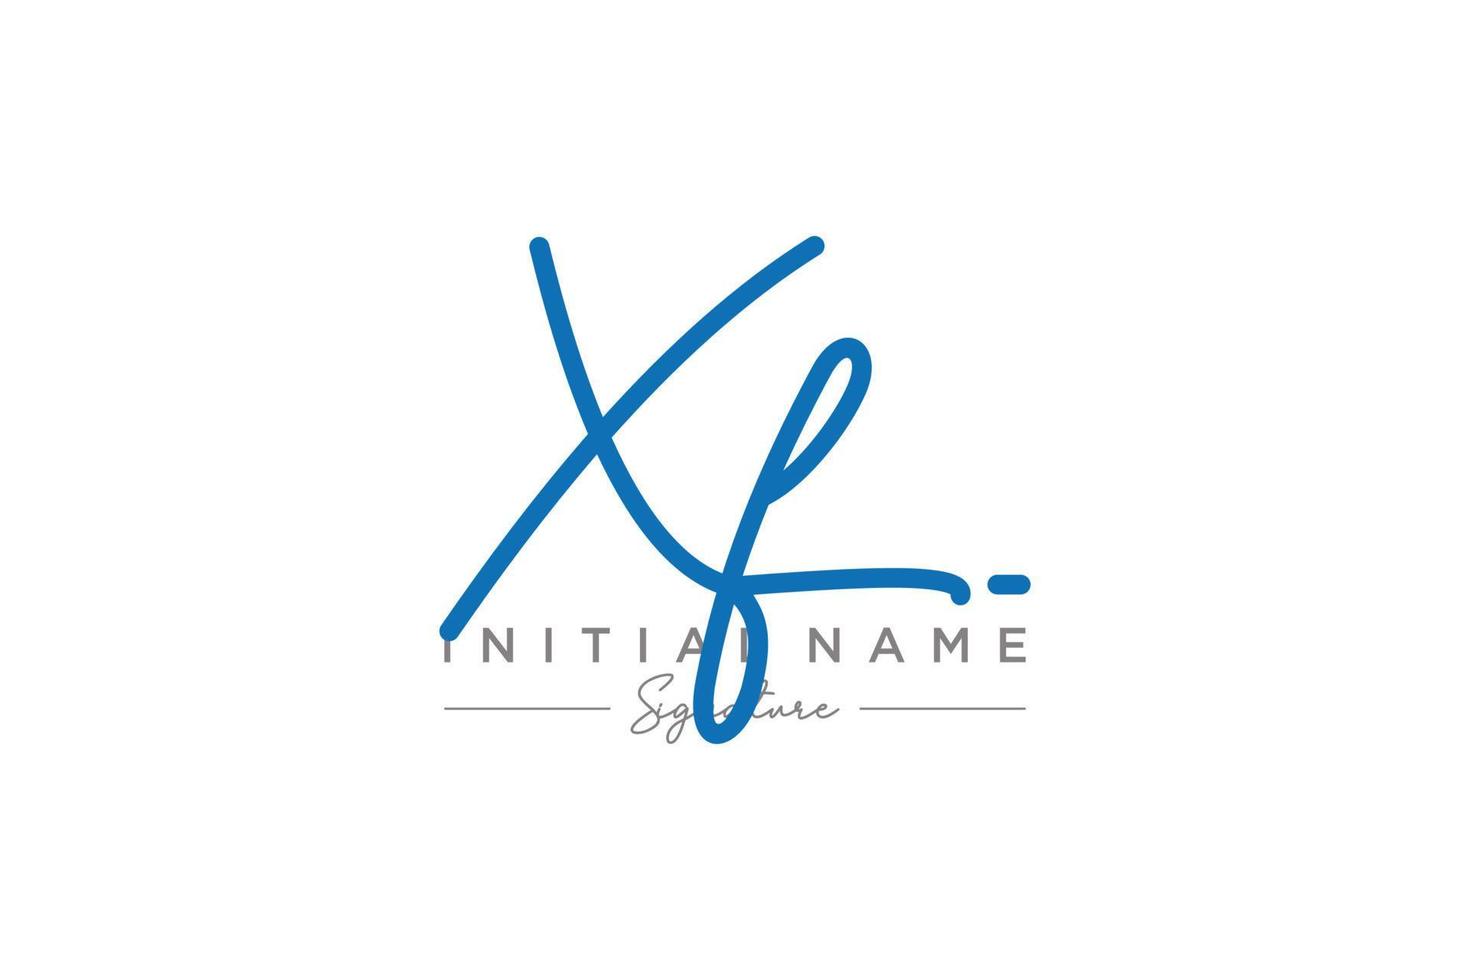 Initial XF signature logo template vector. Hand drawn Calligraphy lettering Vector illustration.